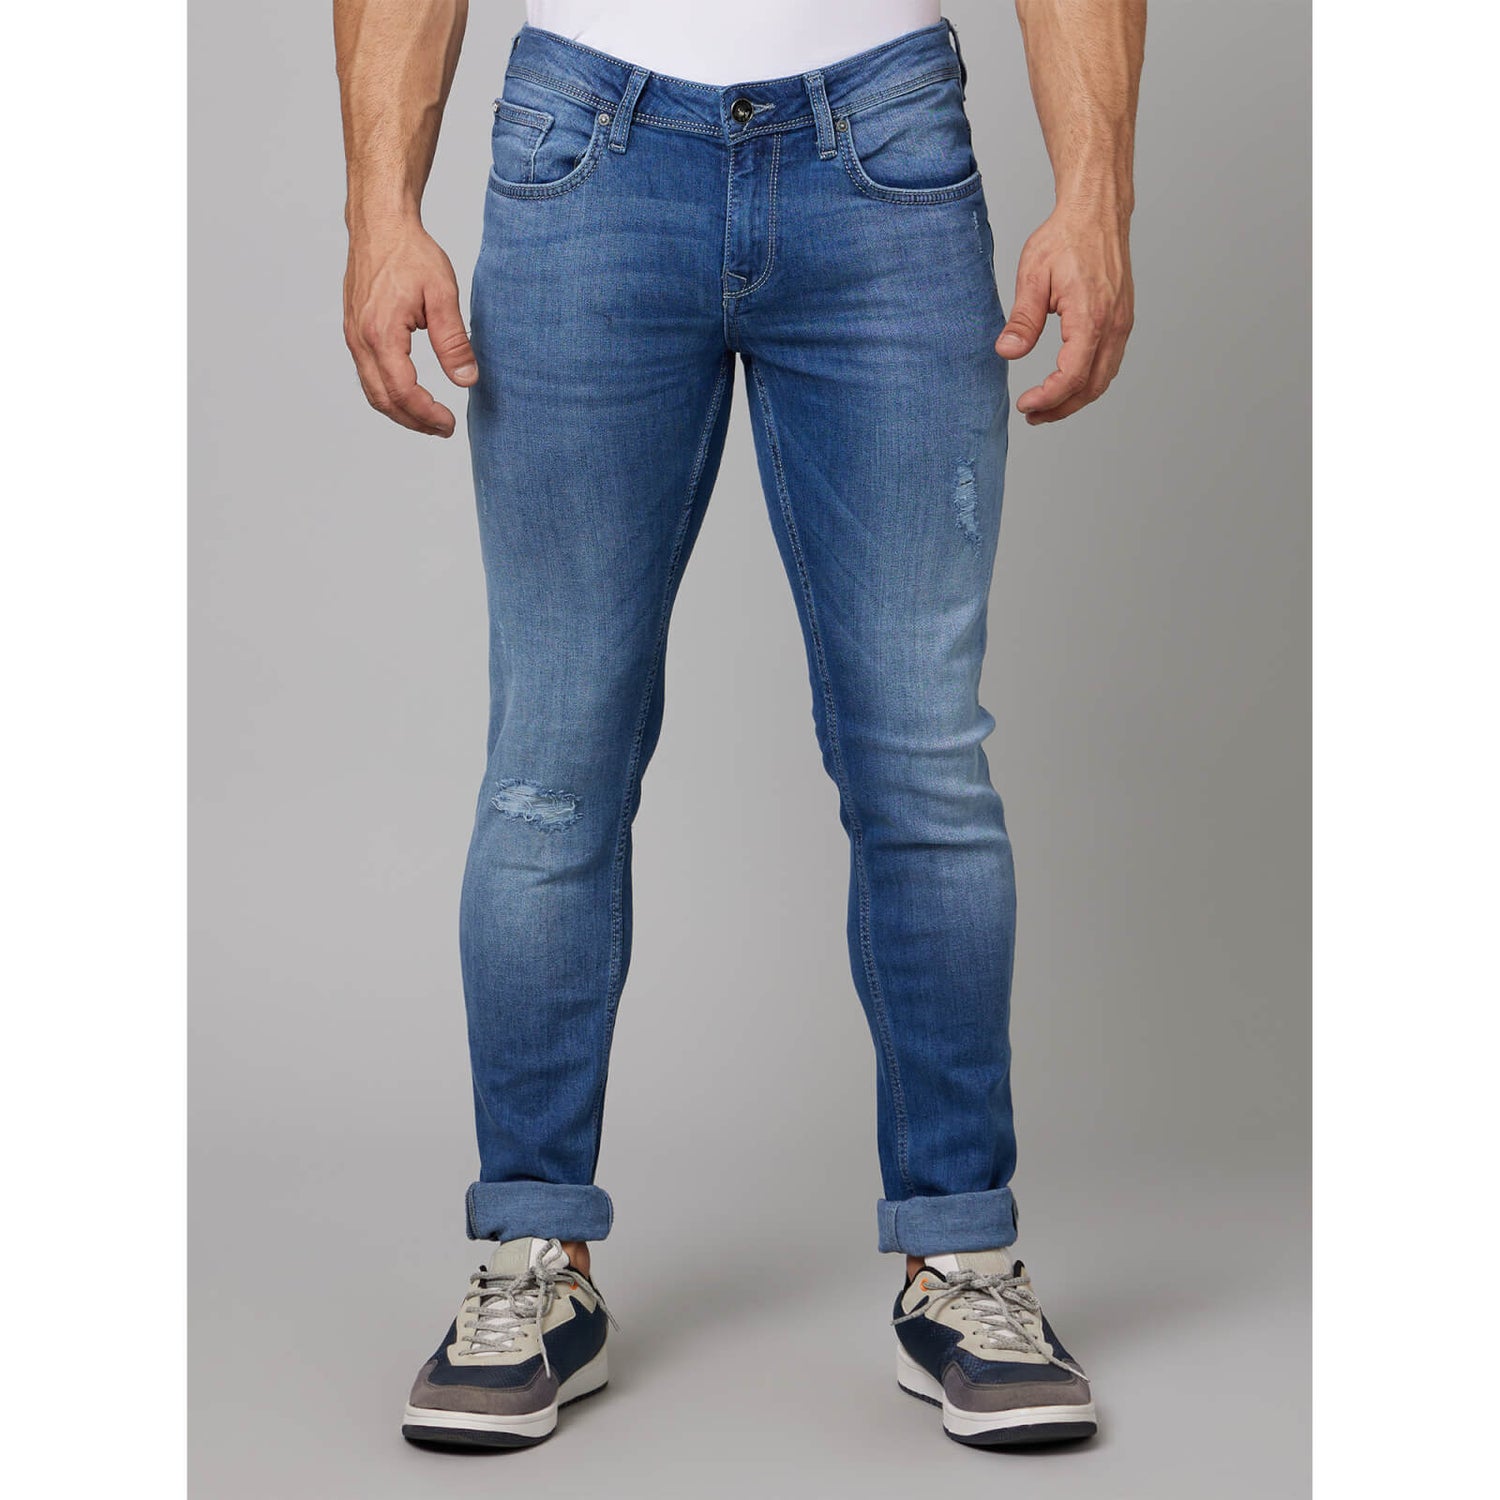 Details more than 108 low distress jeans